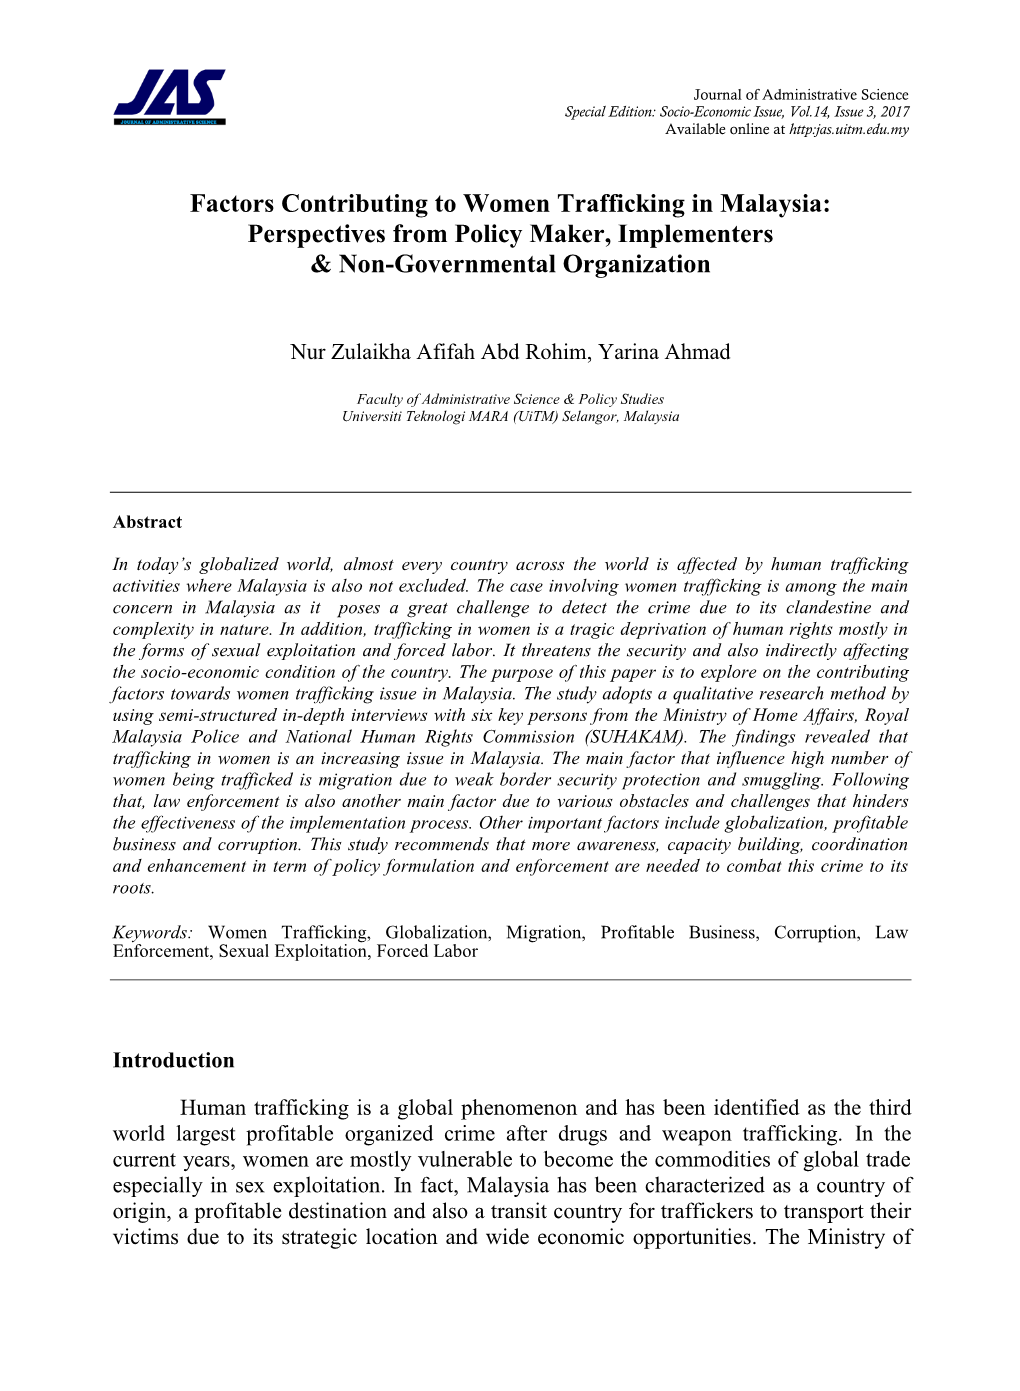 Factors Contributing to Women Trafficking in Malaysia: Perspectives from Policy Maker, Implementers & Non-Governmental Organization